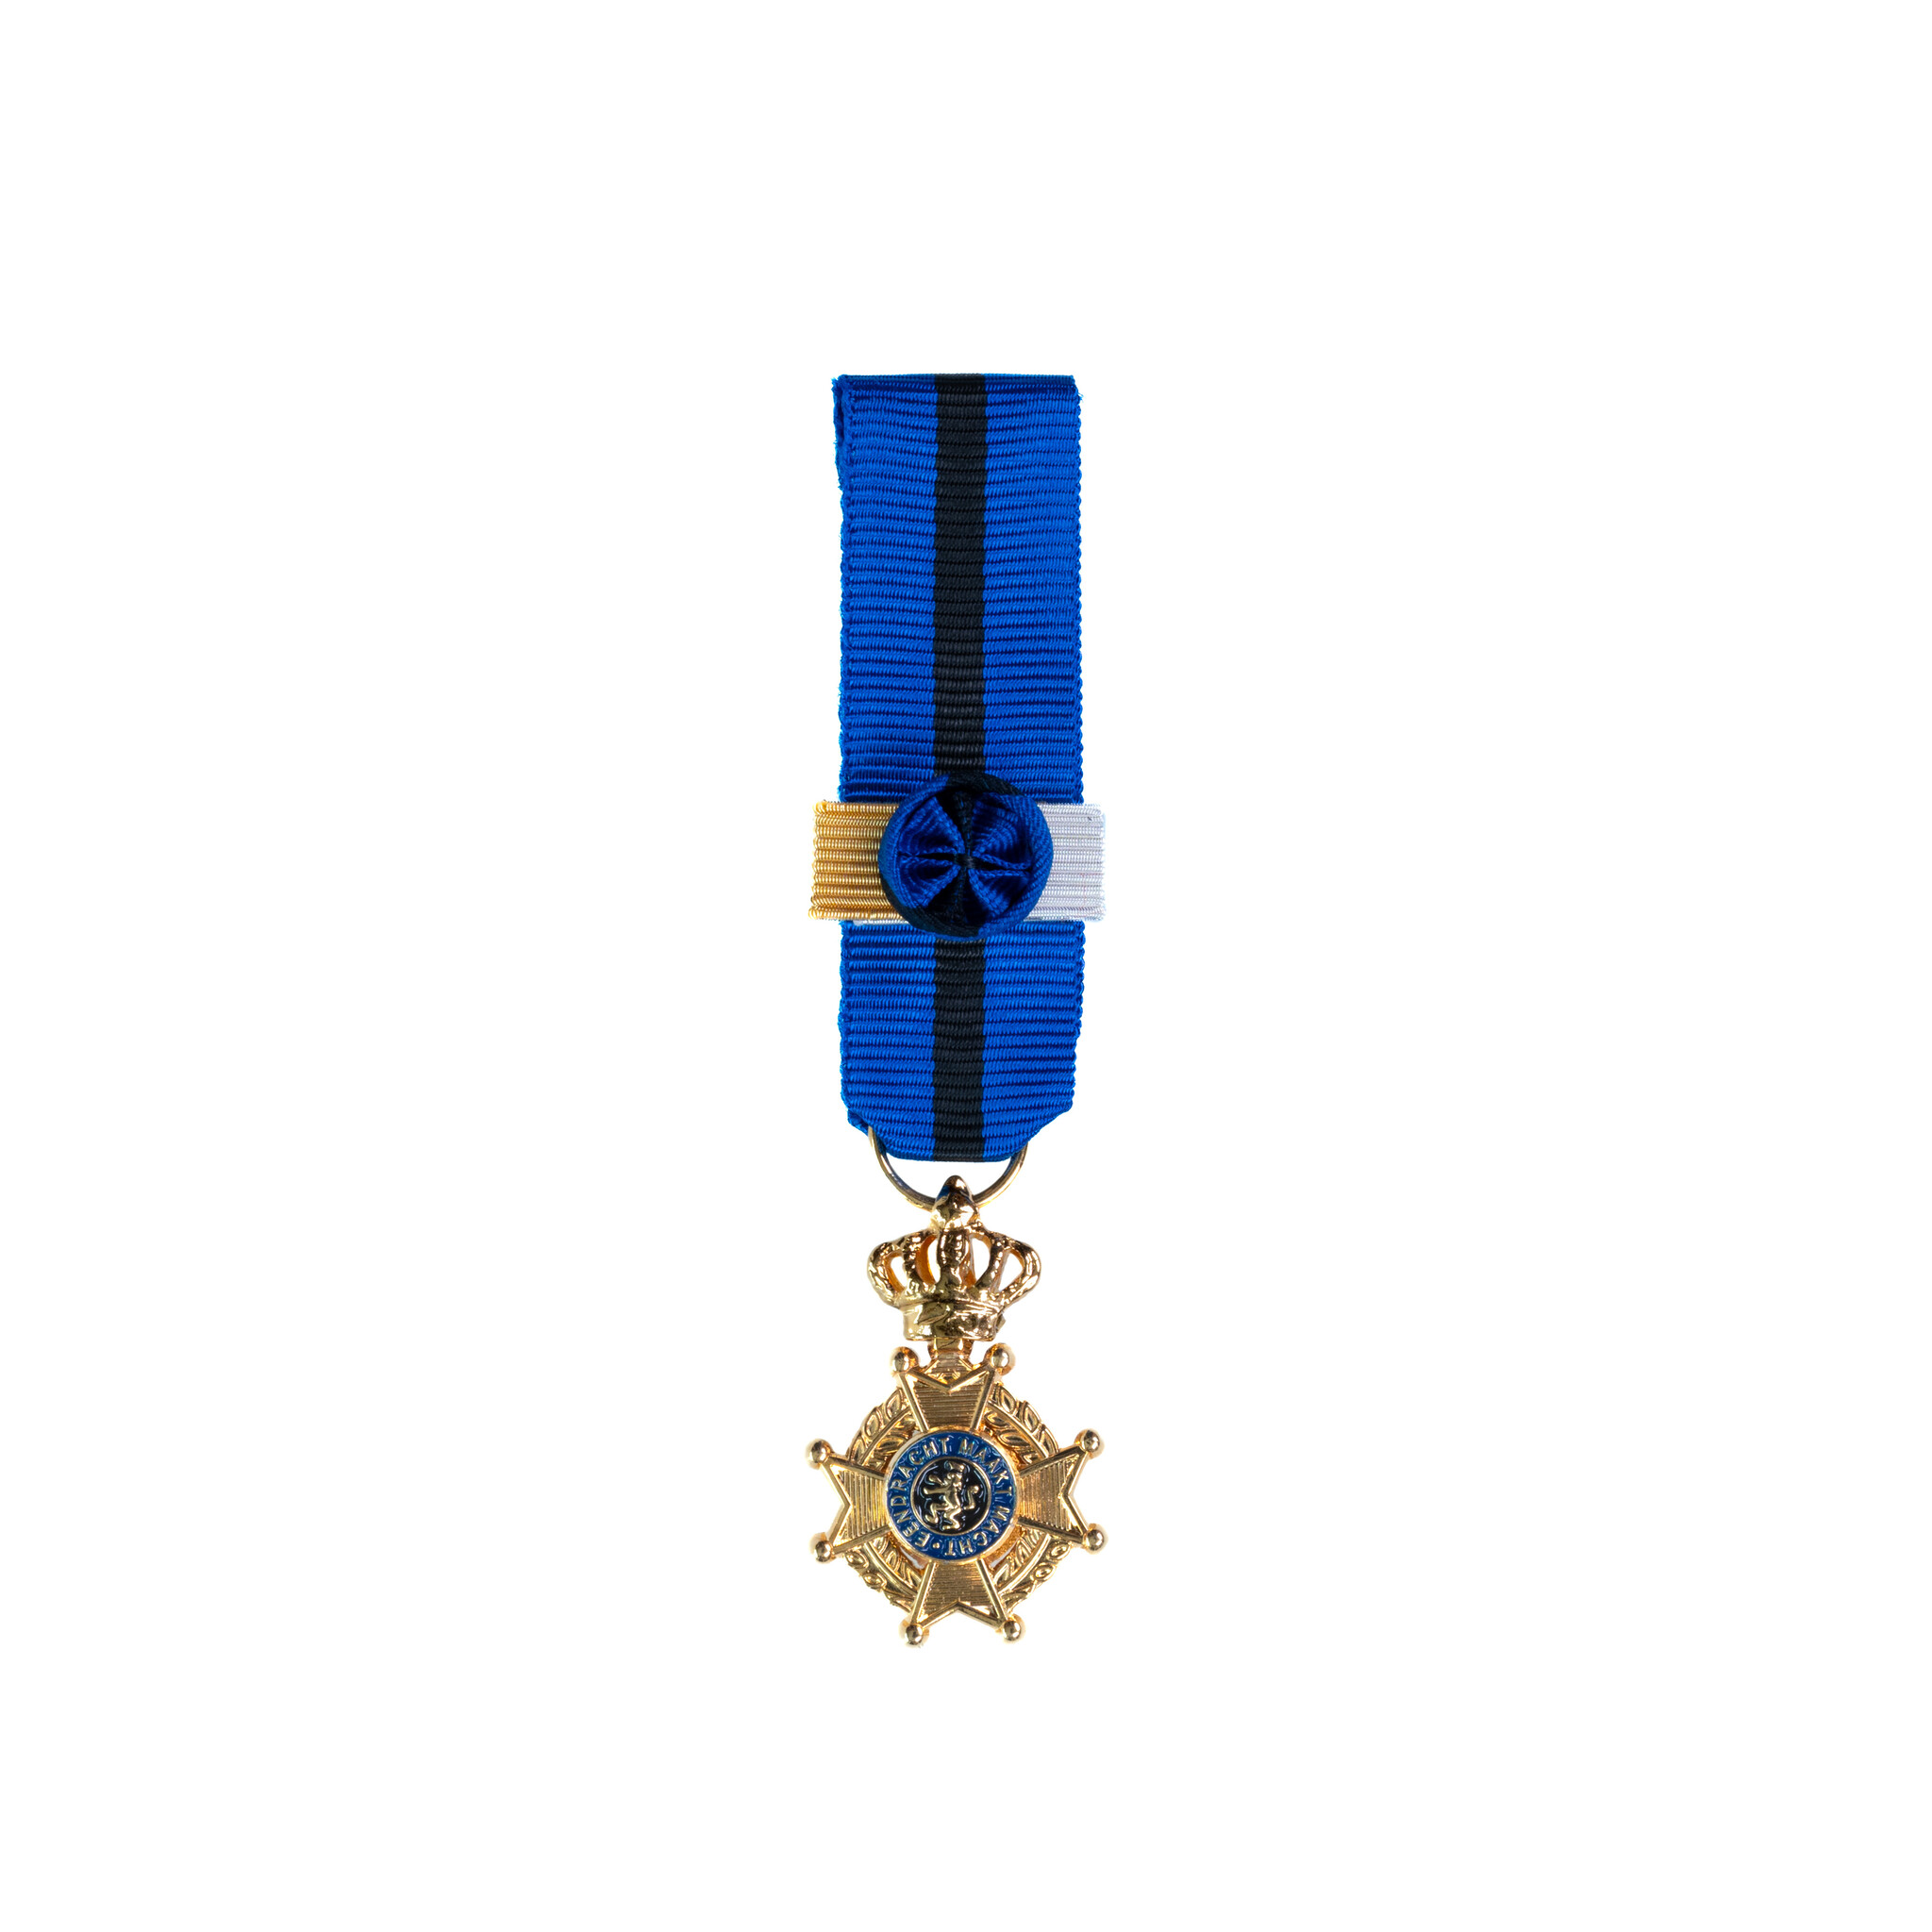 Grand Officer of the Order of Leopold II